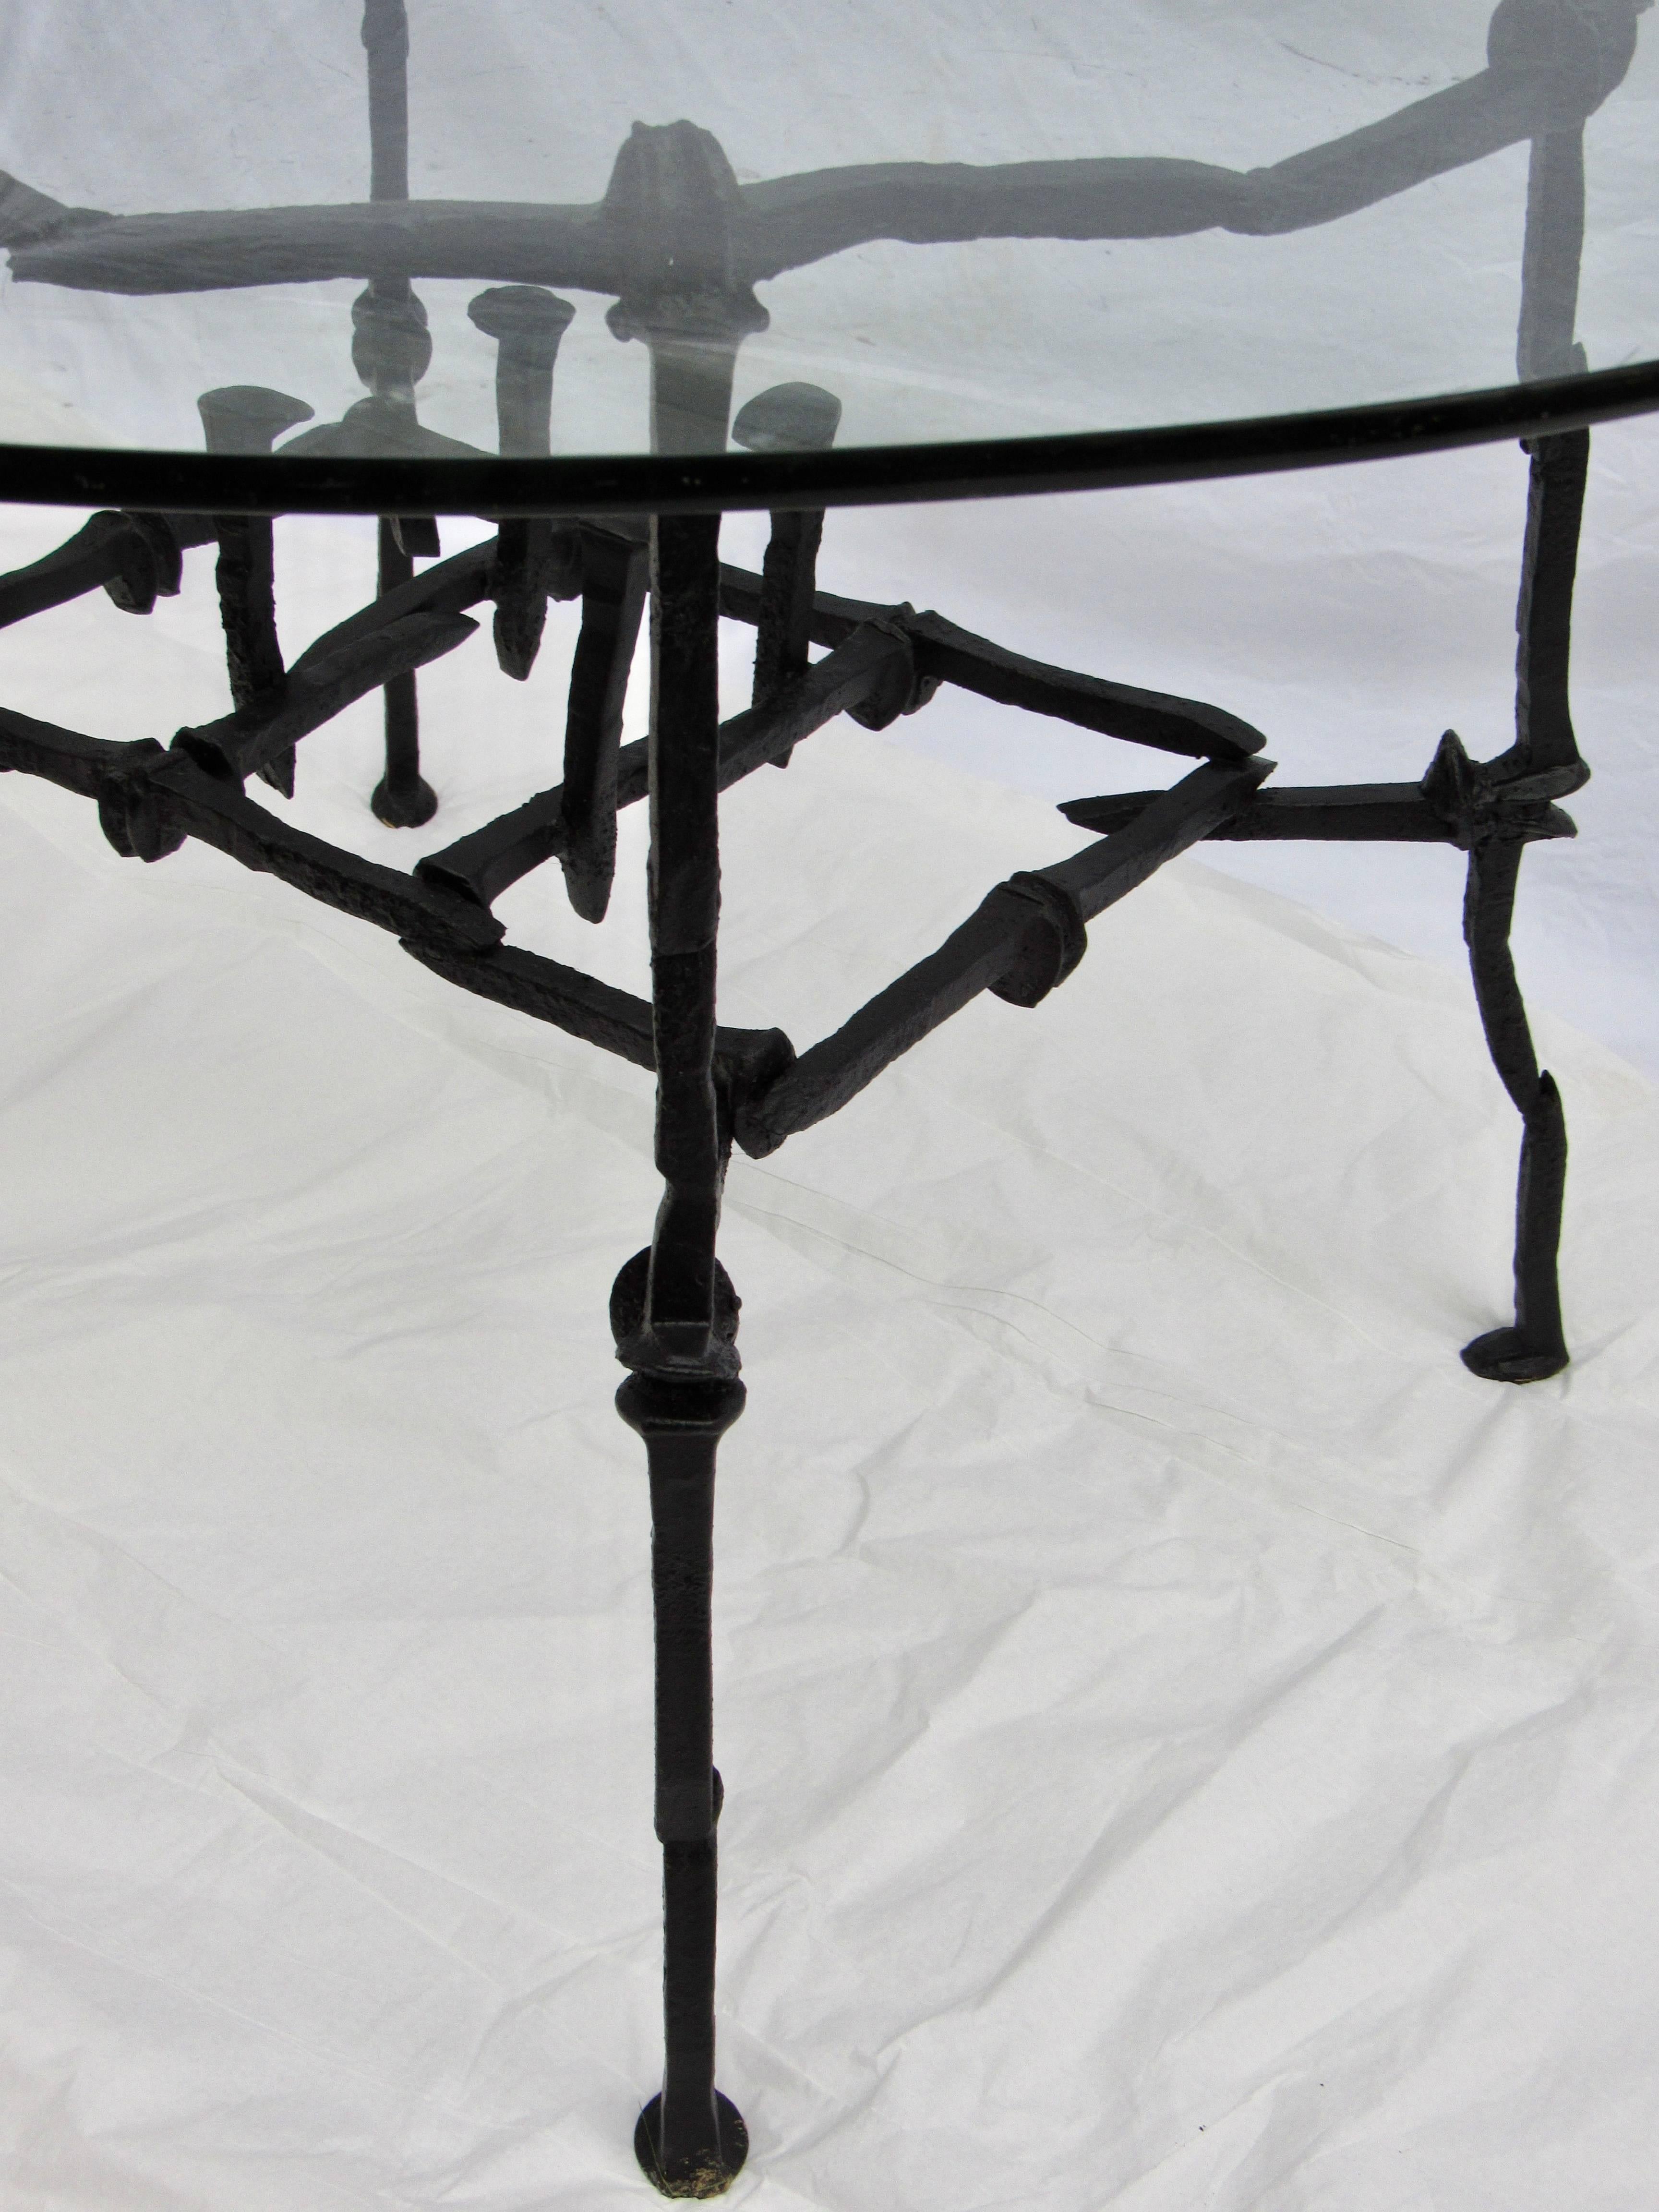 Wrought Iron Railroad Spike Breakfast / Game Table Studio Handcrafted Welded Circa 1970